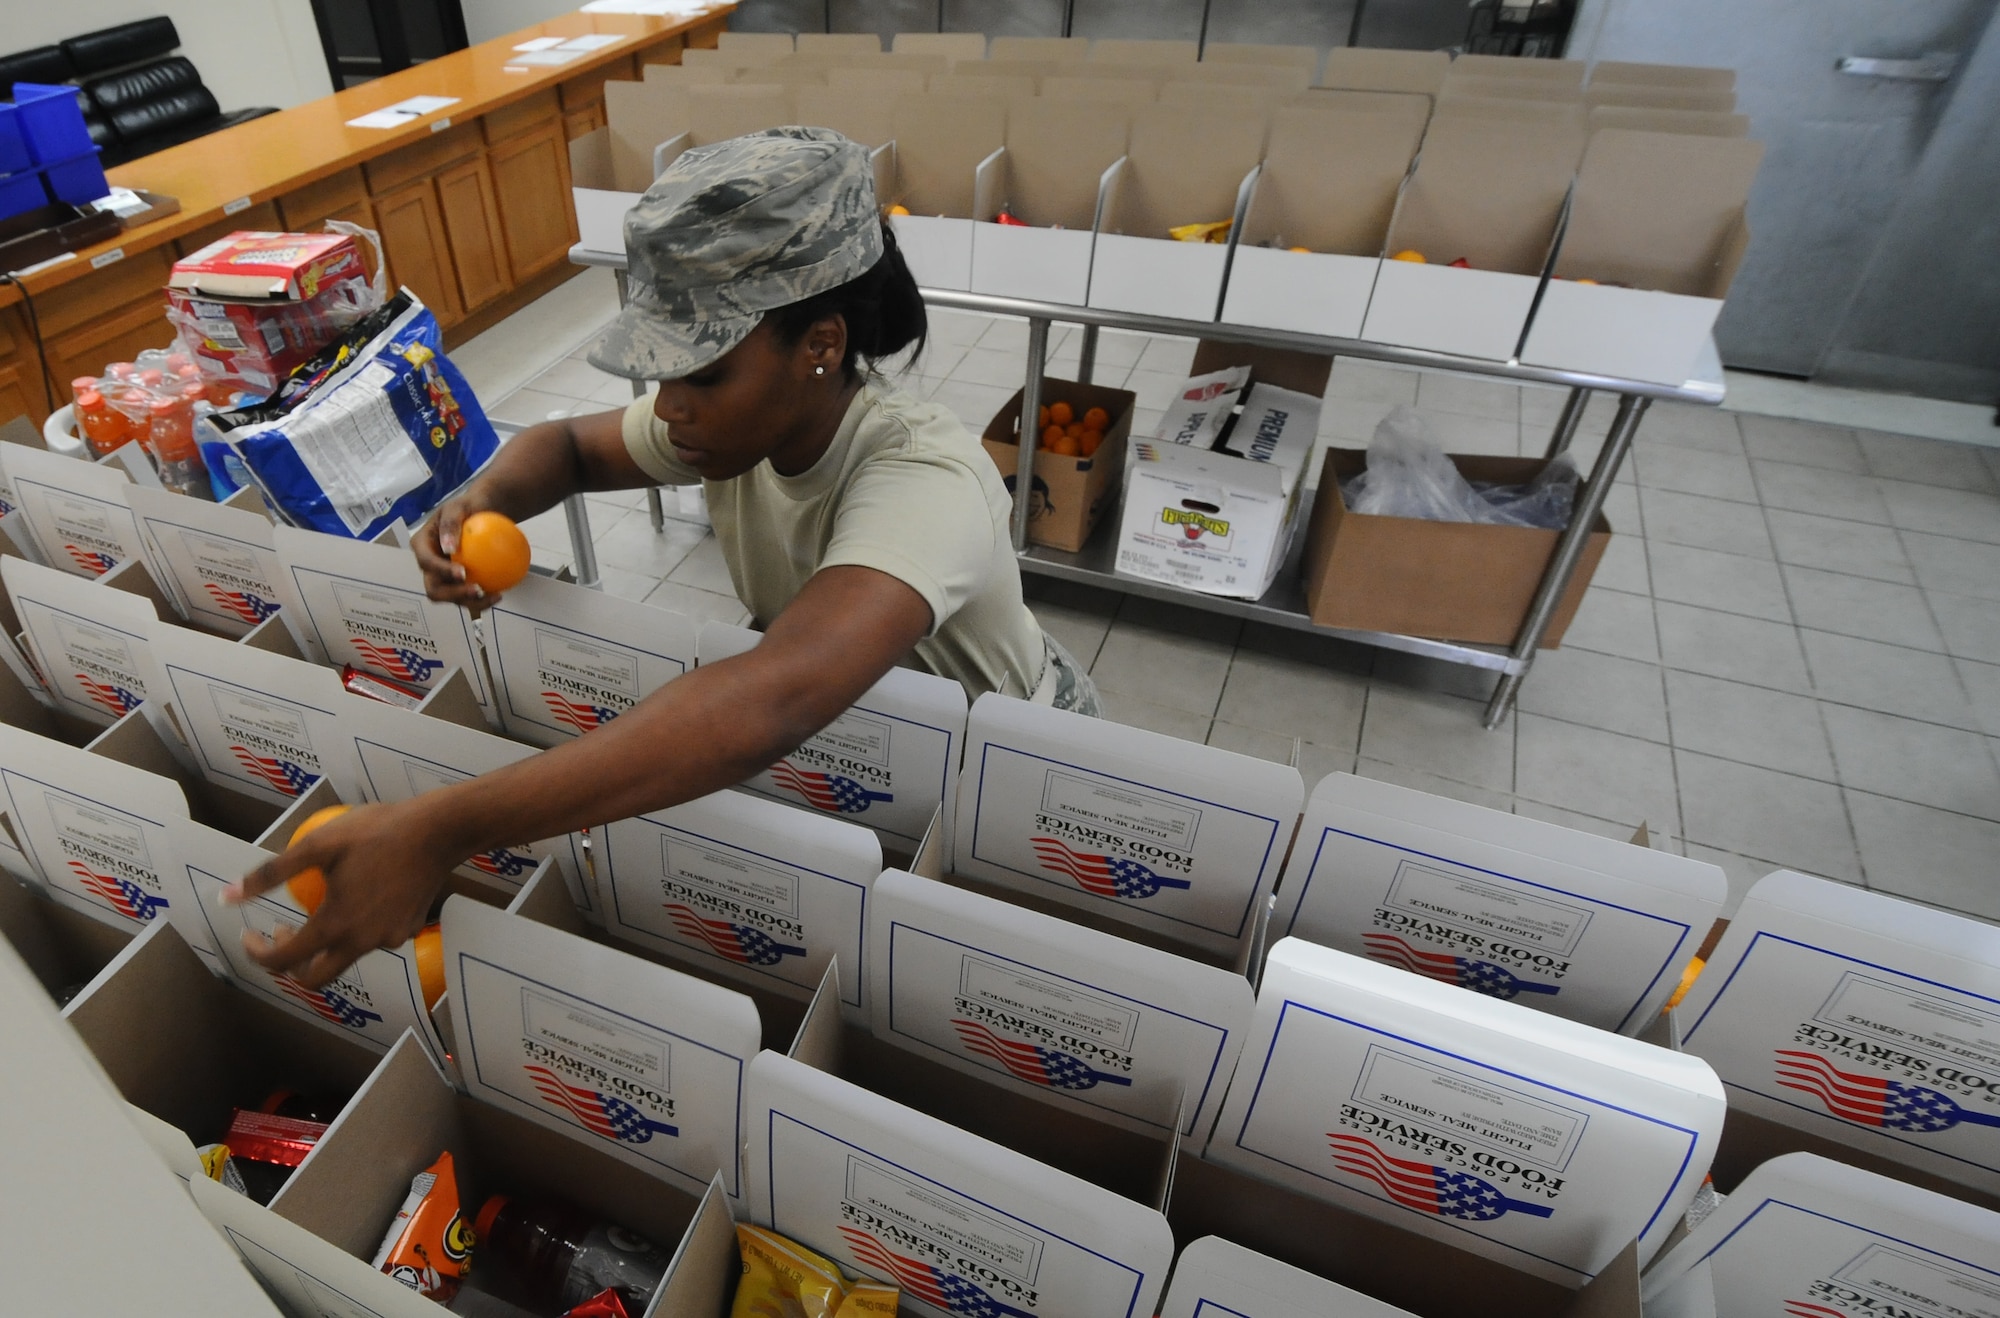 Senior Airman Angel Lewis, 36th Force Support Squadron services journeyman deployed from the Georgia Air National Guard, prepares boxed lunches by distributing oranges June 10, 2013, on Andersen Air Force Base, Guam. The 36th FSS Skyline Flight Kitchen team prepares approximately 700 boxed lunches and 1,000 hot meals per week. (U.S. Air Force photo by Airman 1st Class Emily A. Bradley/Released) 366-8136/5125